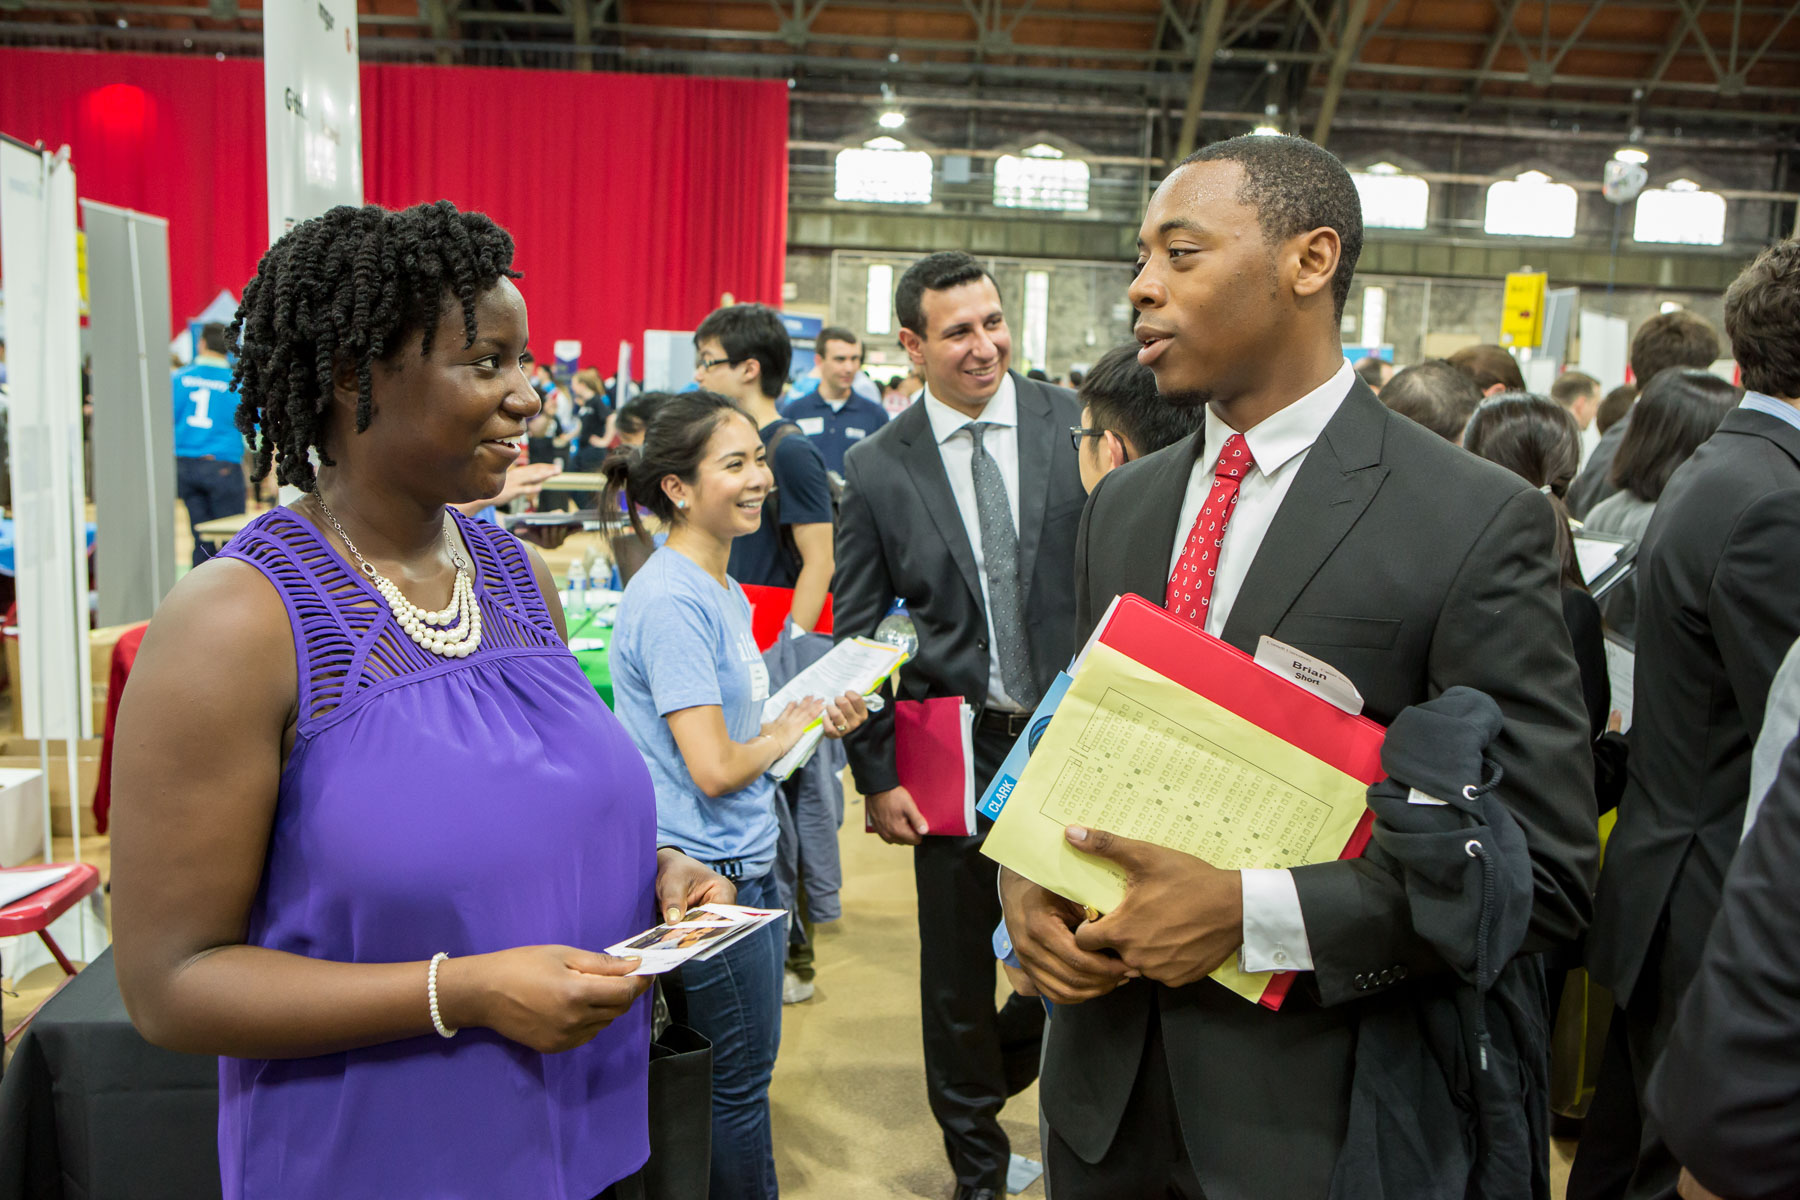 Scene at a job fair for college students